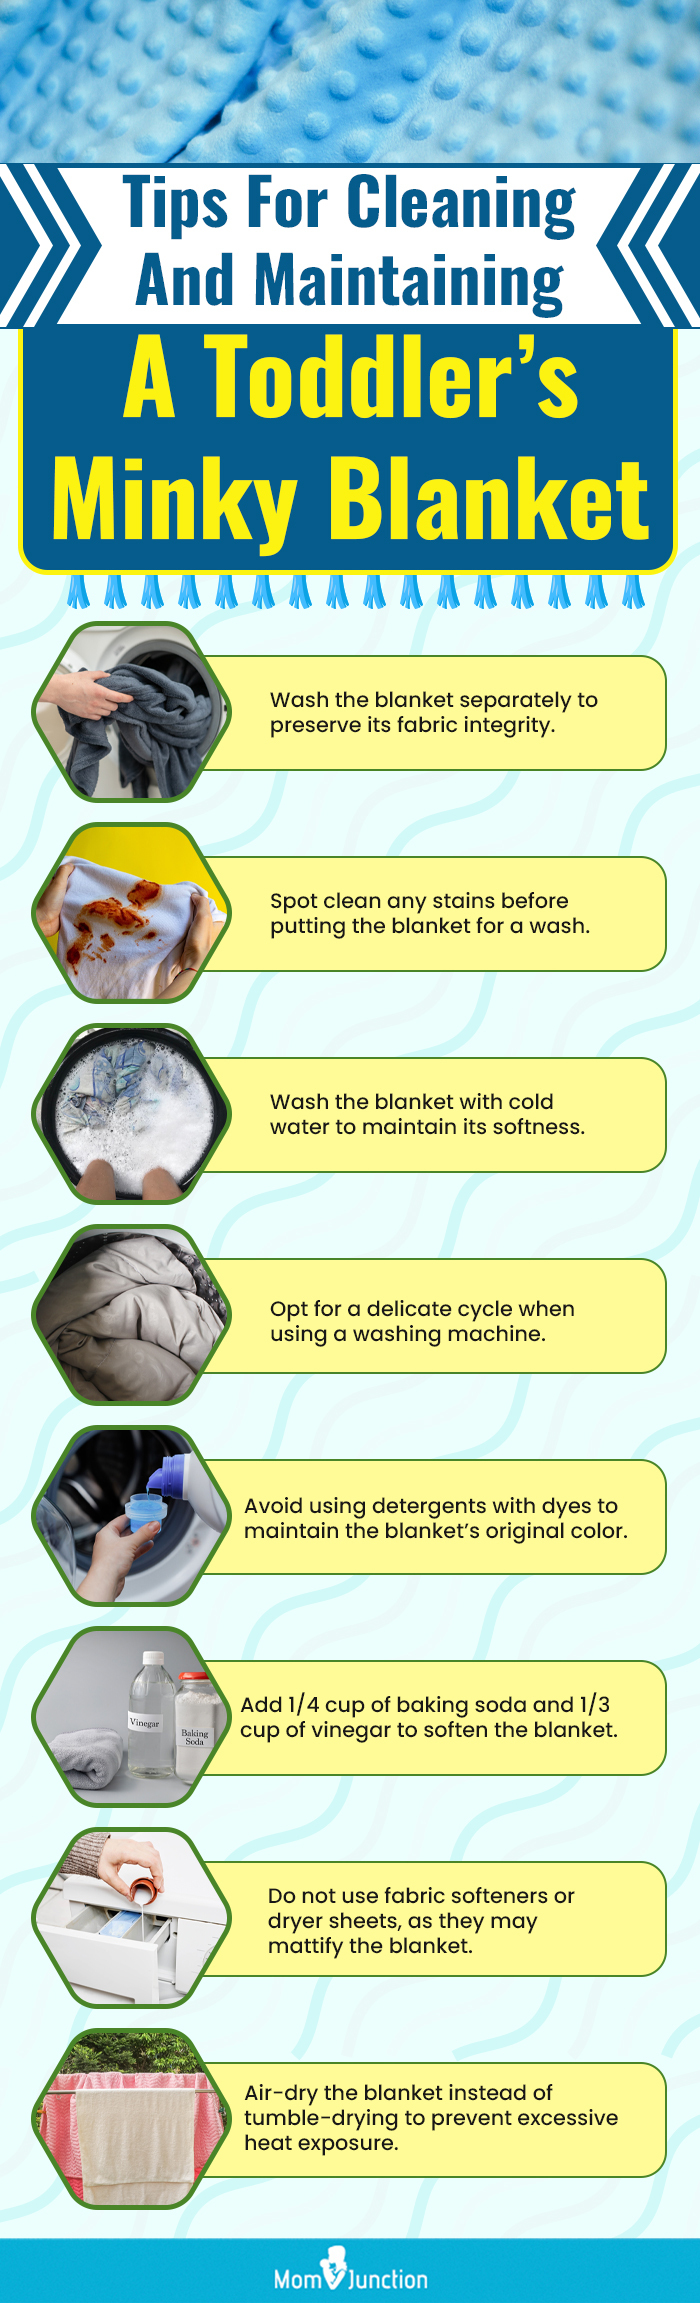 Tips For Cleaning And Maintaining A Toddler’s Minky Blanket (infographic)